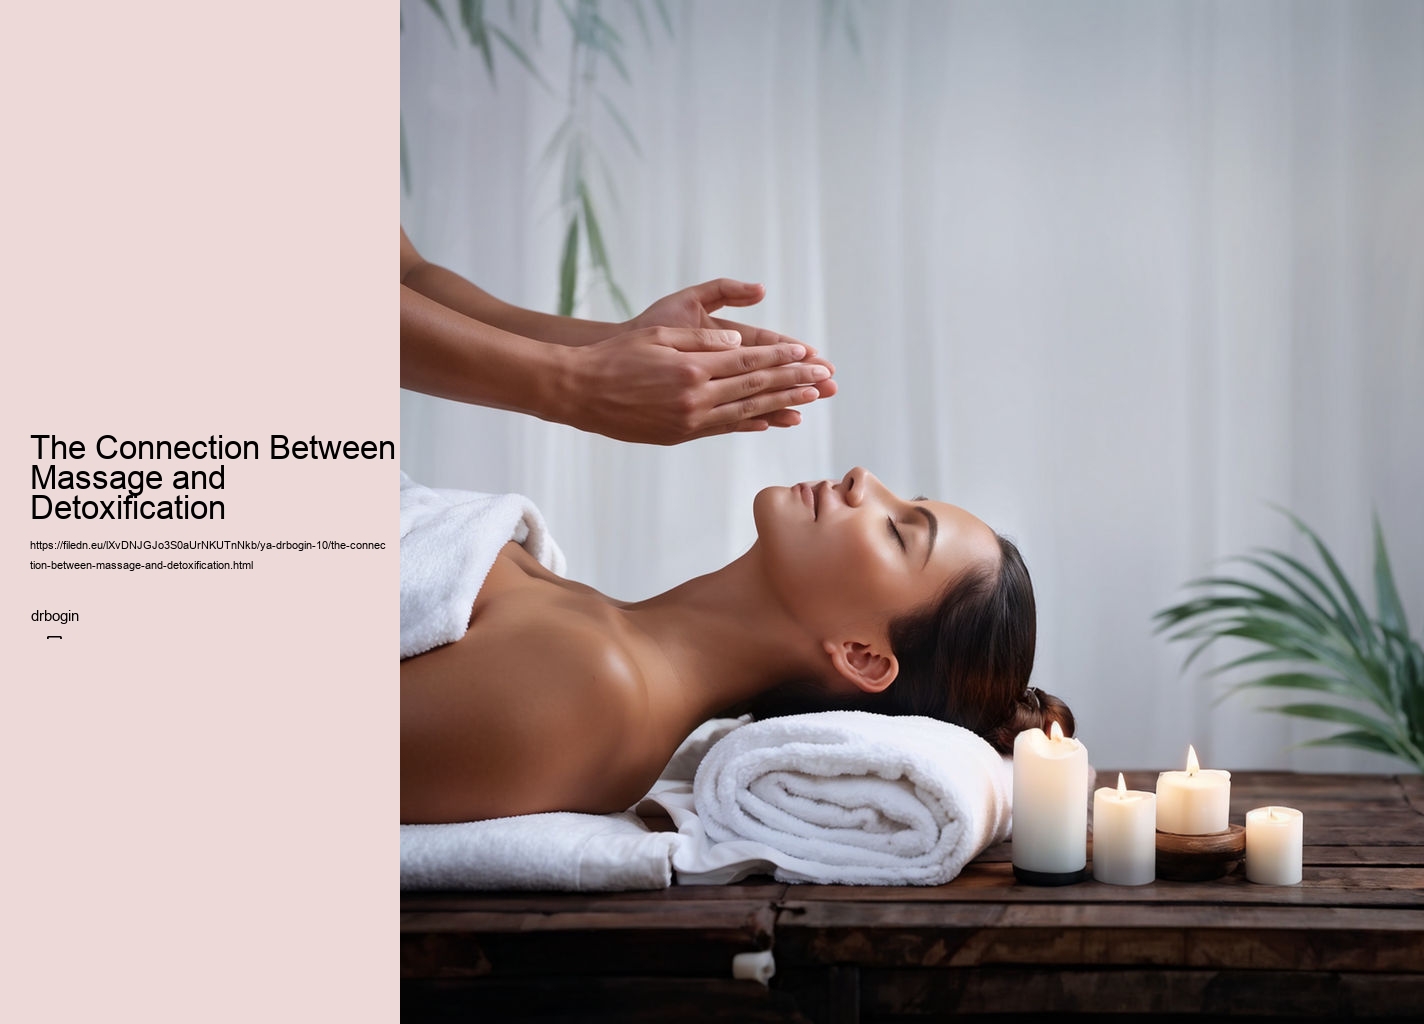 The Connection Between Massage and Detoxification